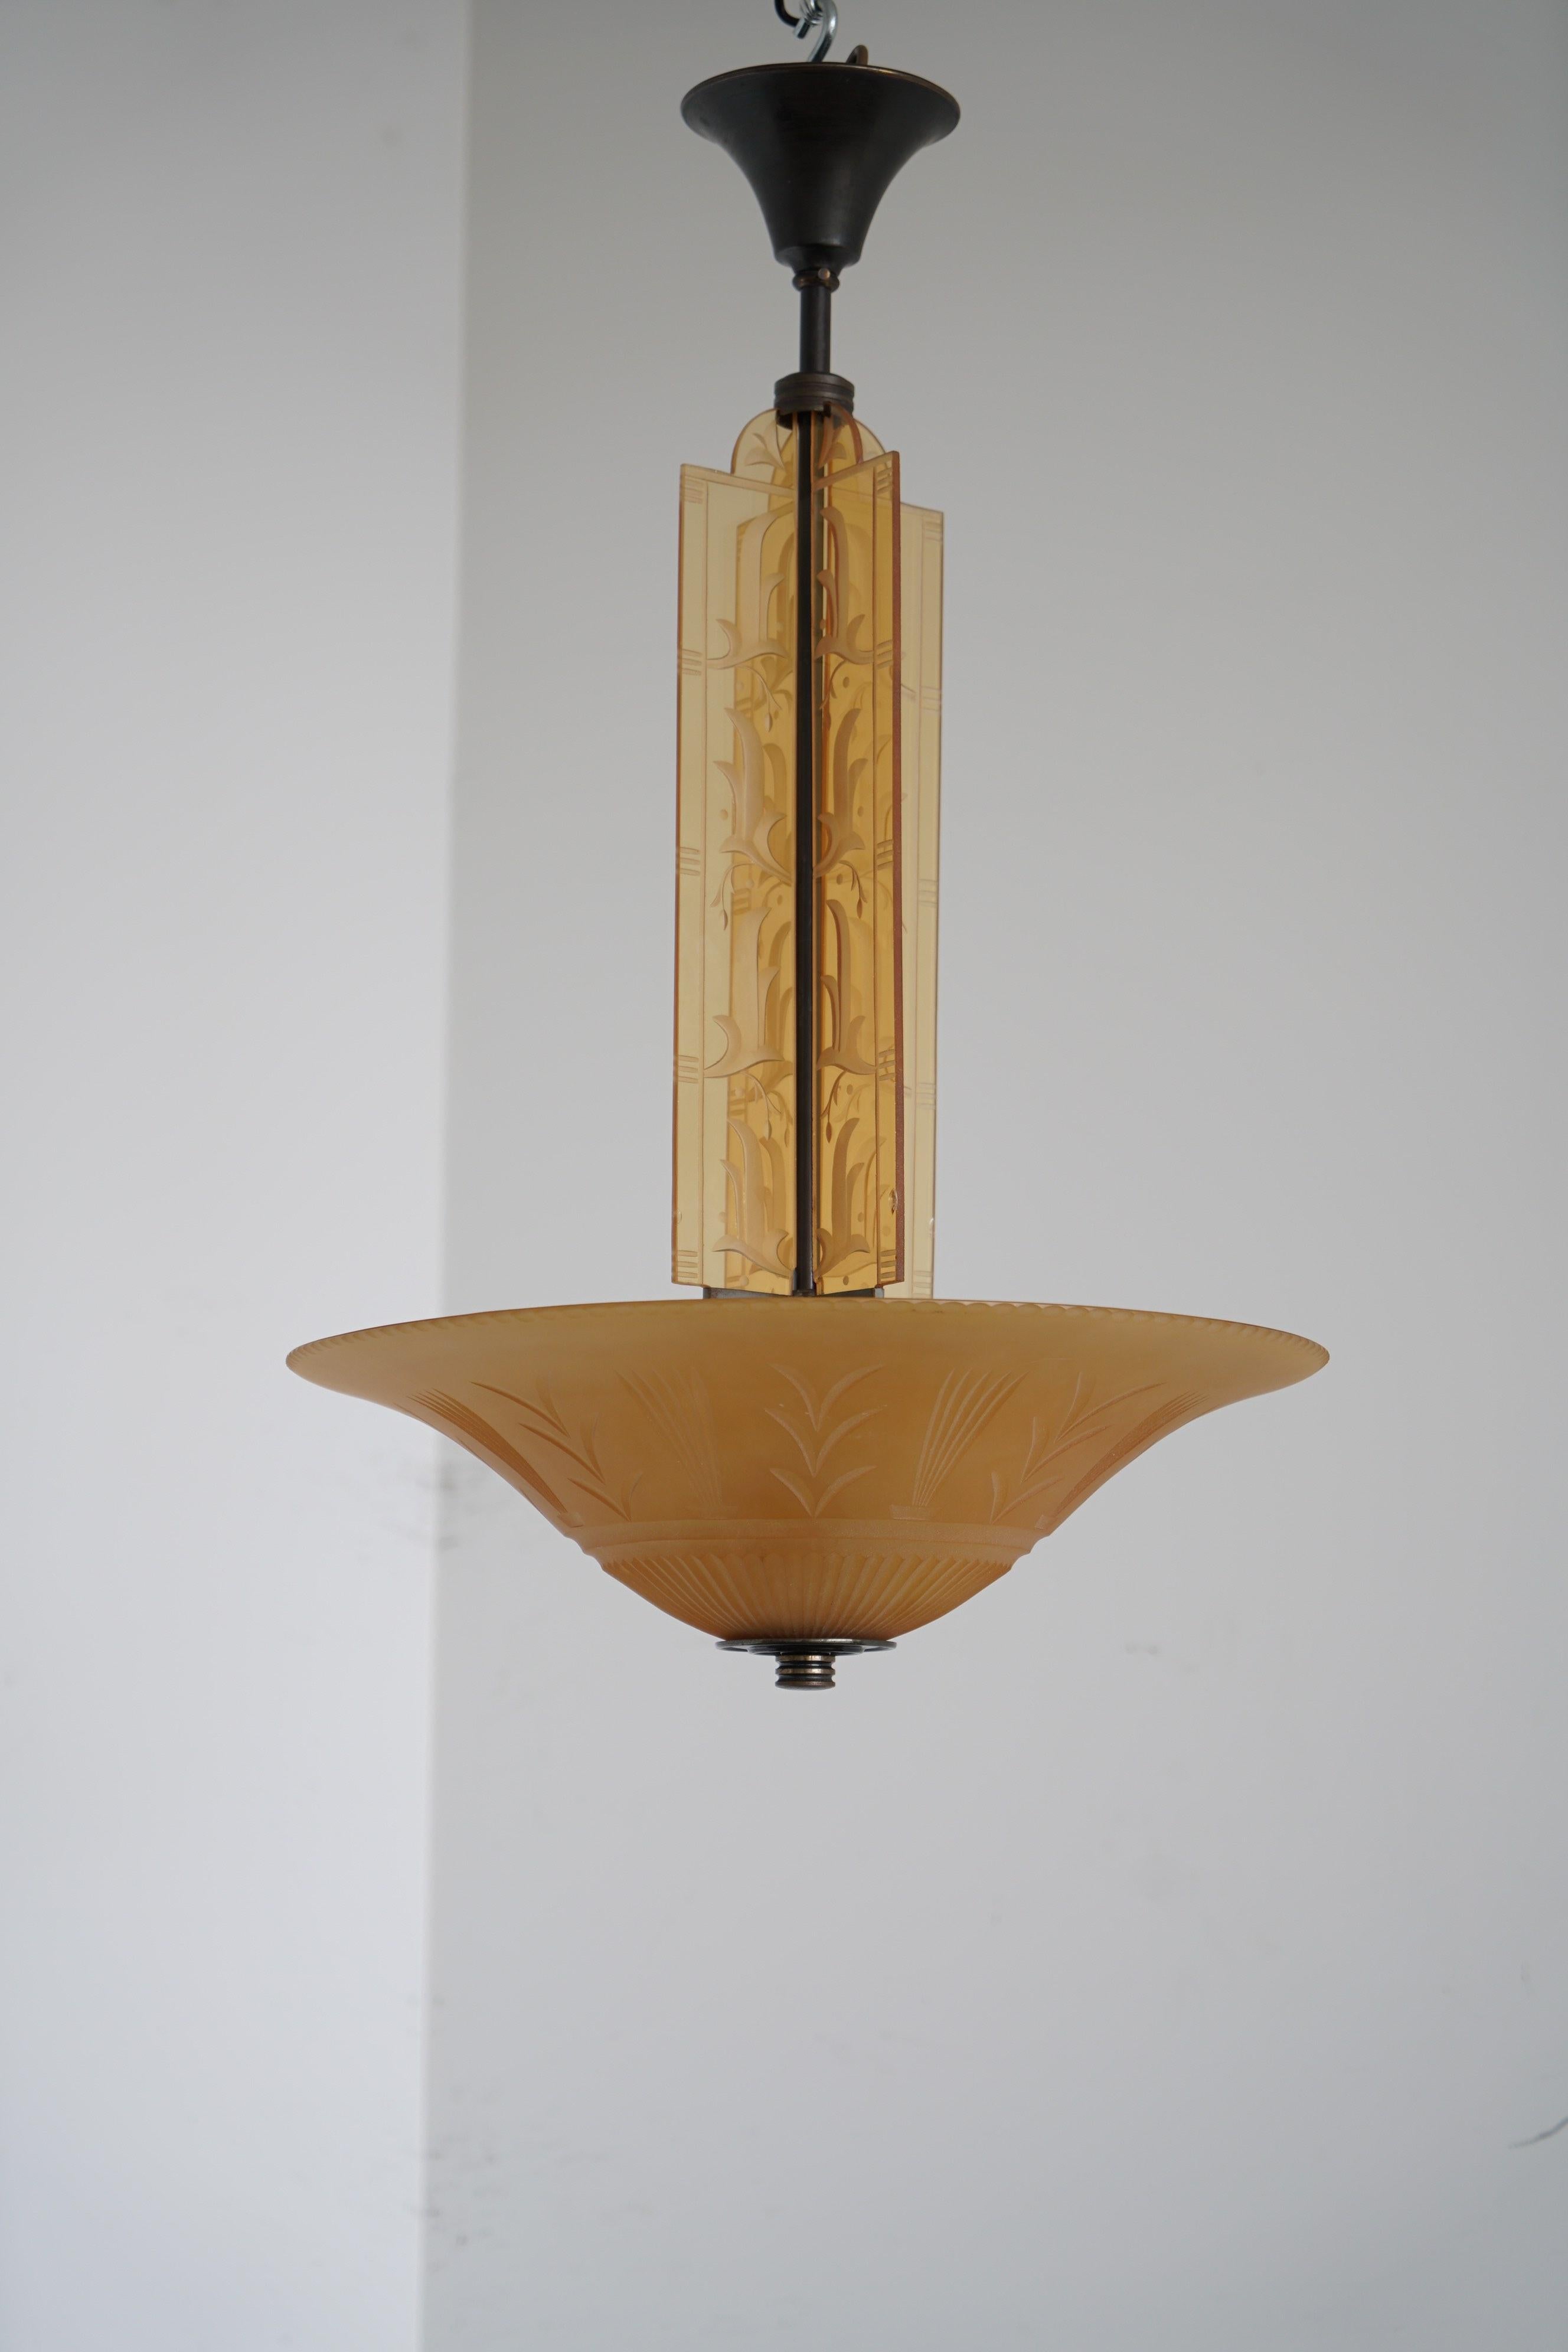 Rare chandelier by Edward Hald, Orrefors, 1930s. Clear Rio brown glass plate and four glass pillars in light-brown glass with engraved and blasted geometric décor. Height 85, diameter 51cm. Rewiring available upon request. Literature Brilliance of